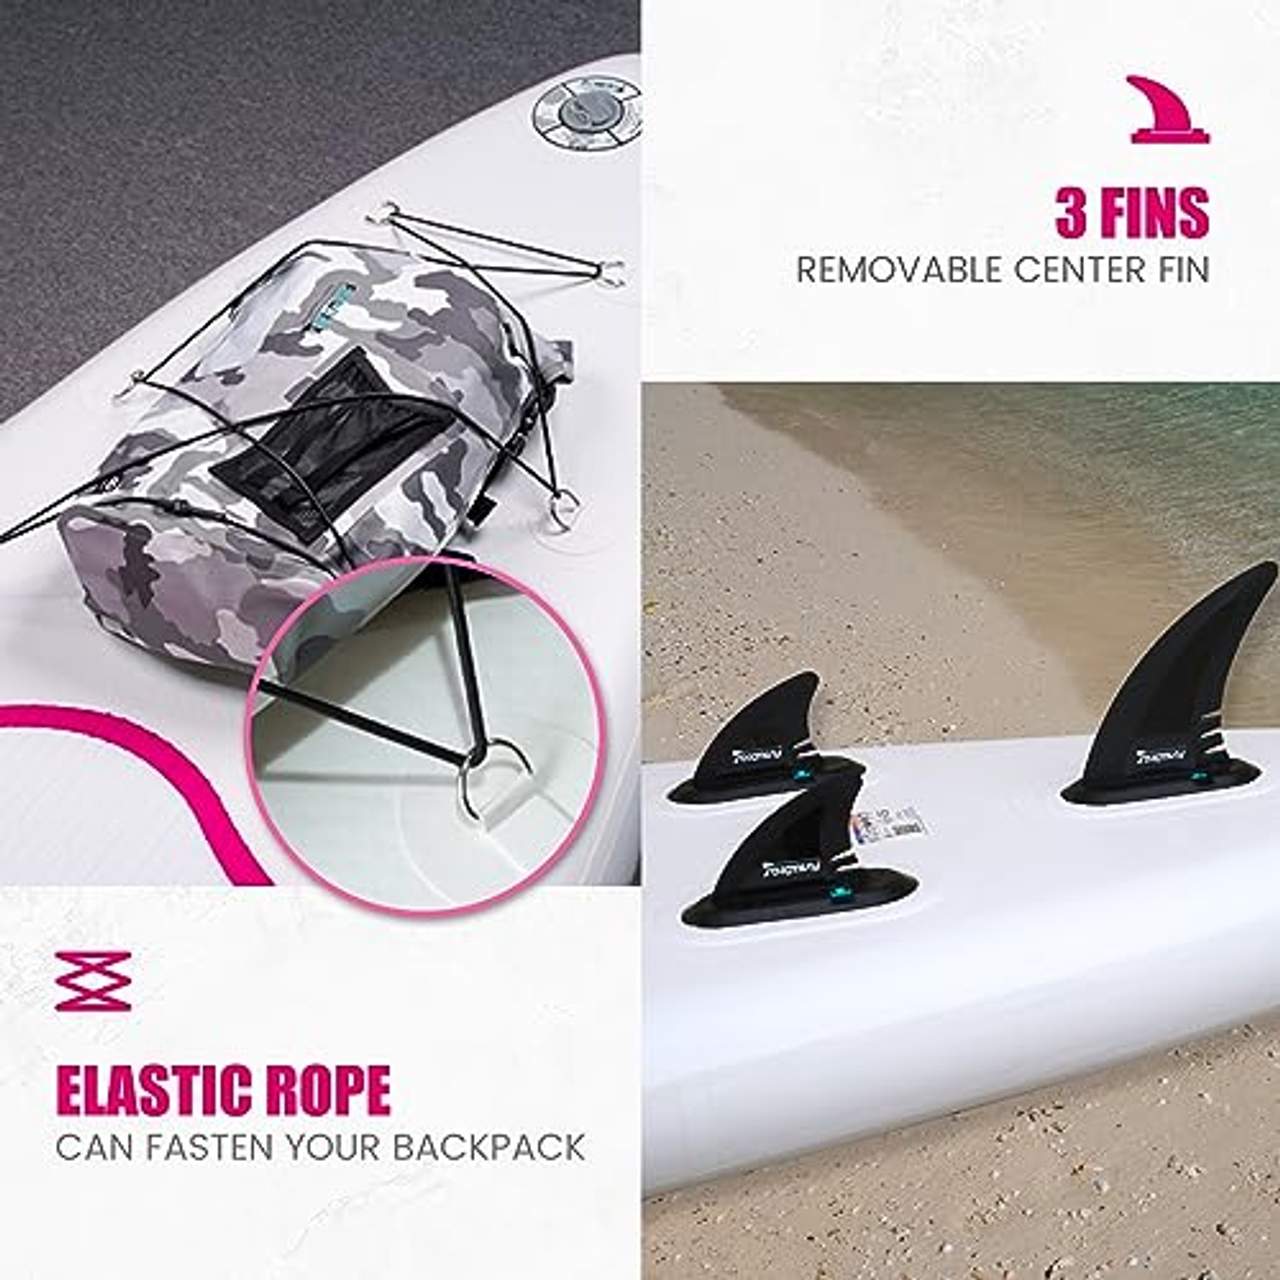 FunWater Aufblasbares Stand Up Paddle Board Surfbrett SUP Komplettes